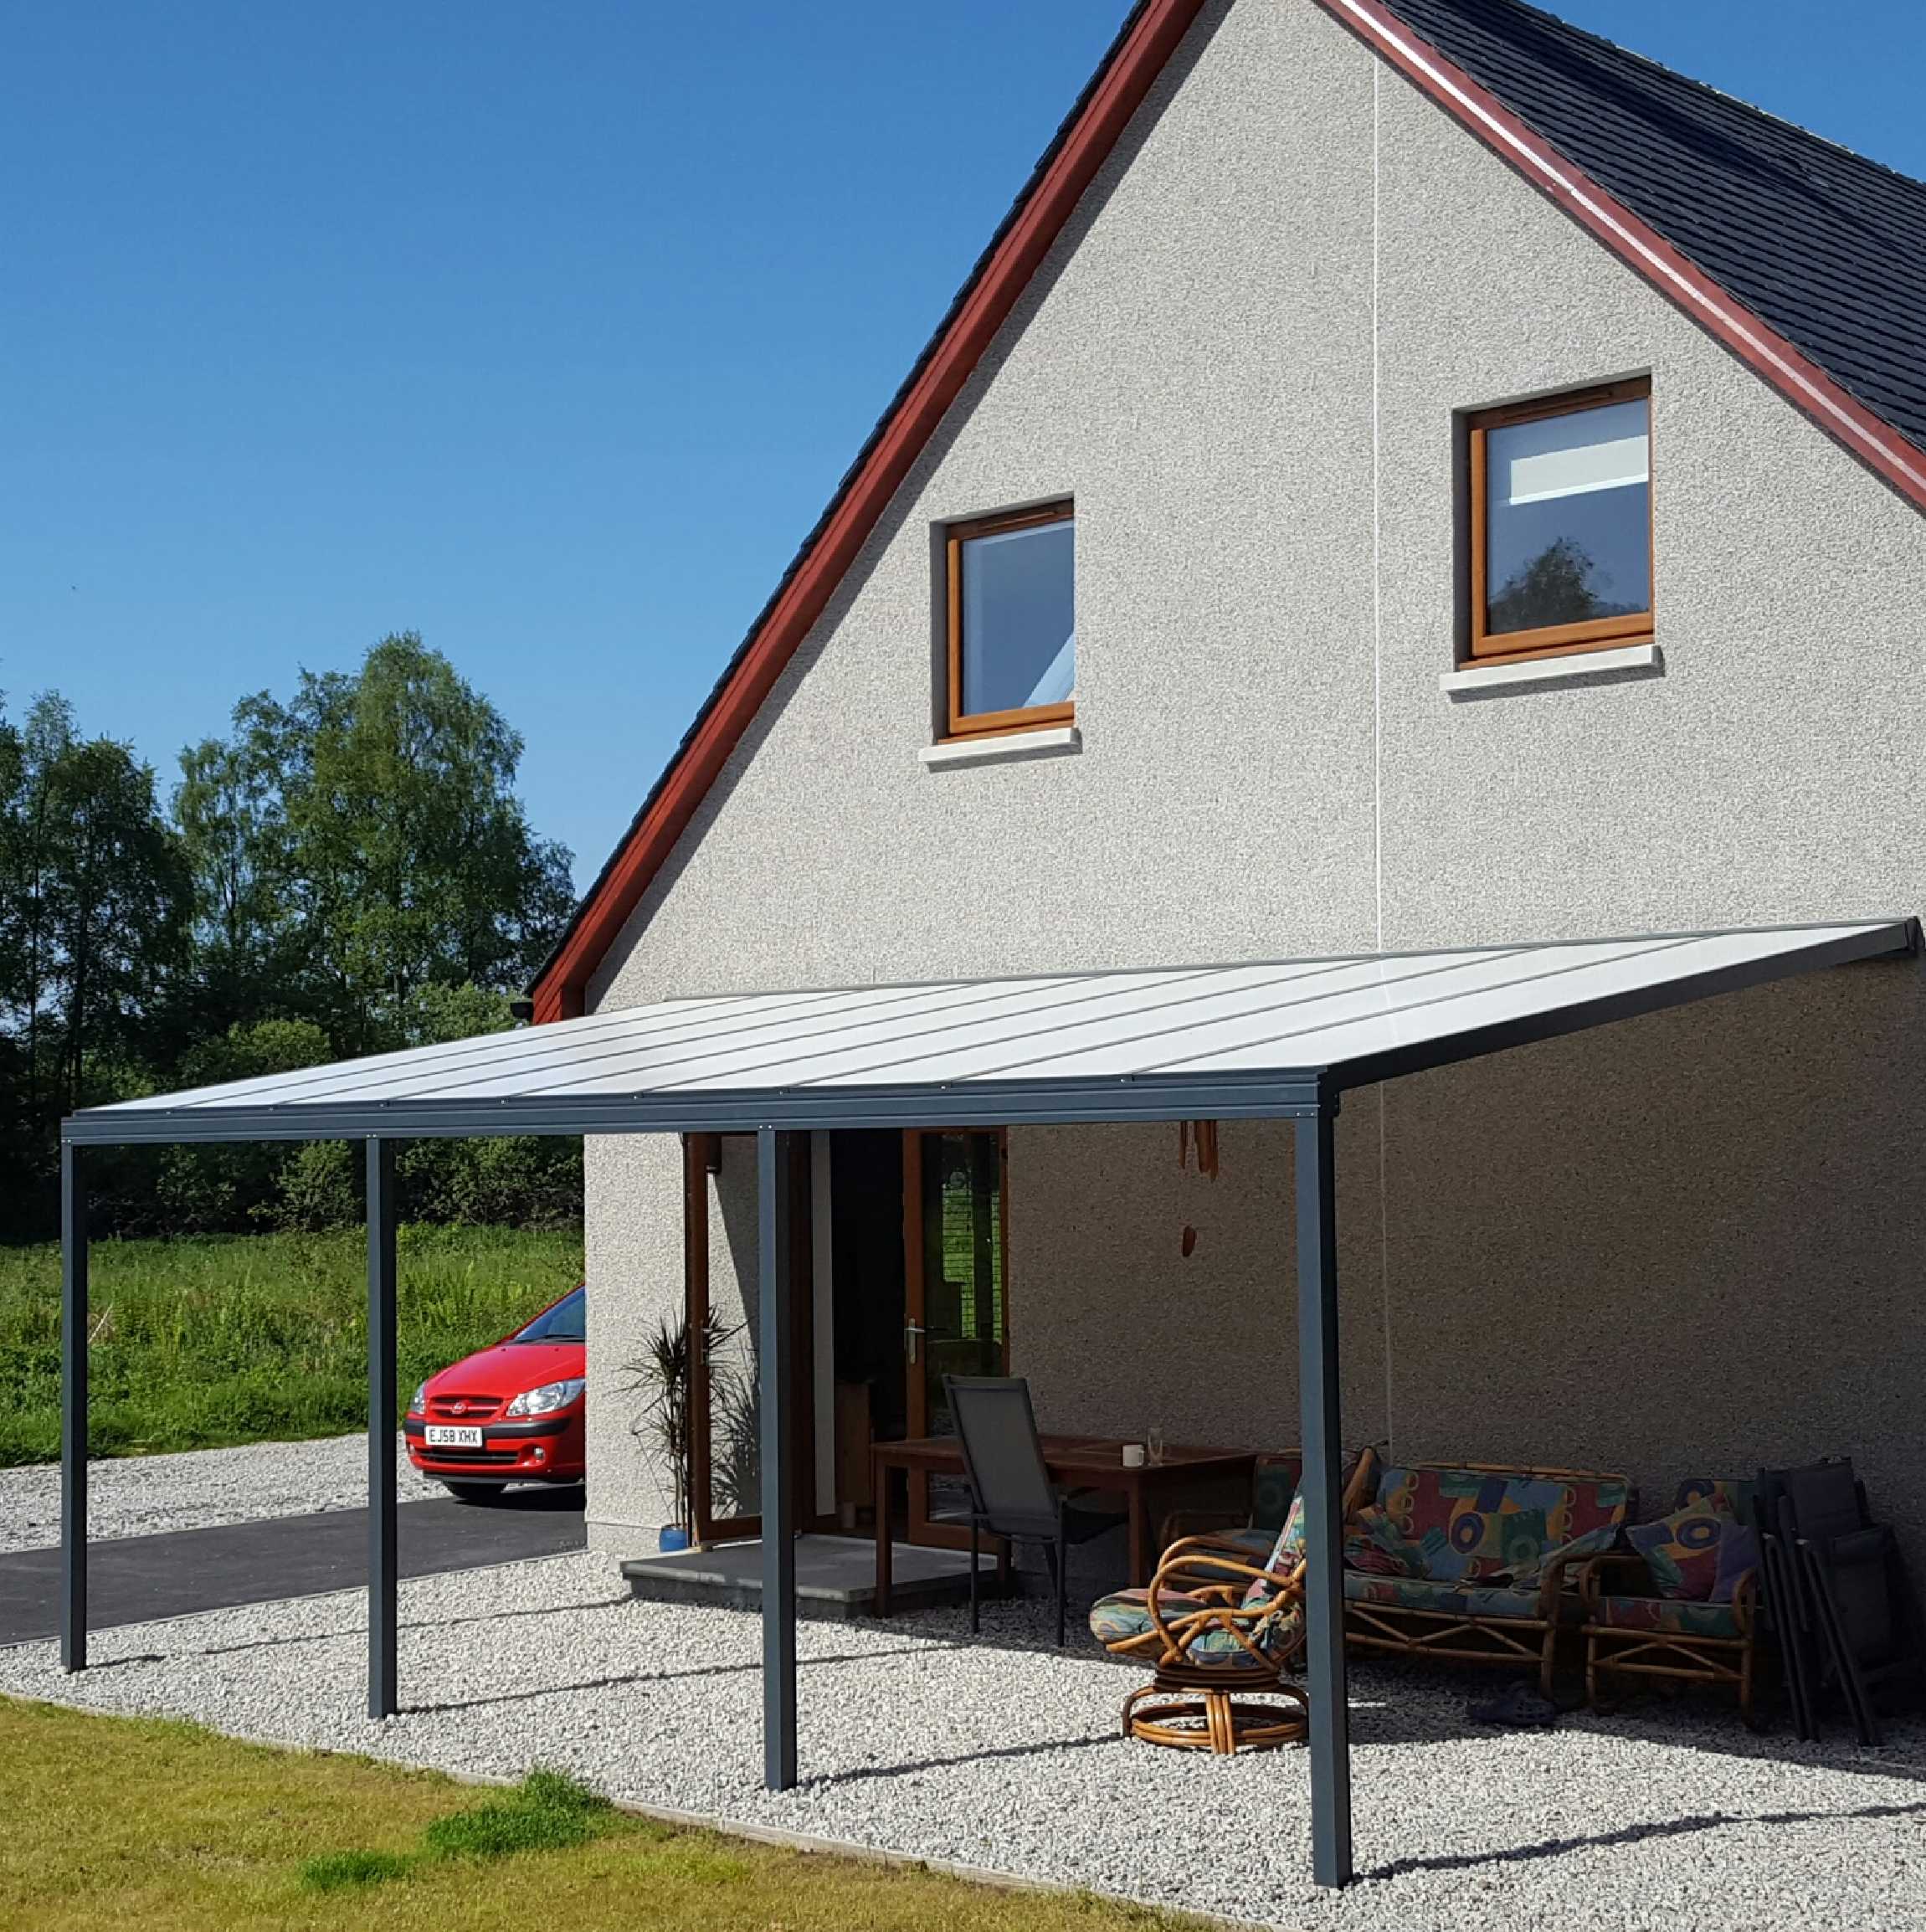 Great selection of Omega Smart Lean-To Canopy, Anthracite Grey, 16mm Polycarbonate Glazing - 9.9m (W) x 4.0m (P), (5) Supporting Posts